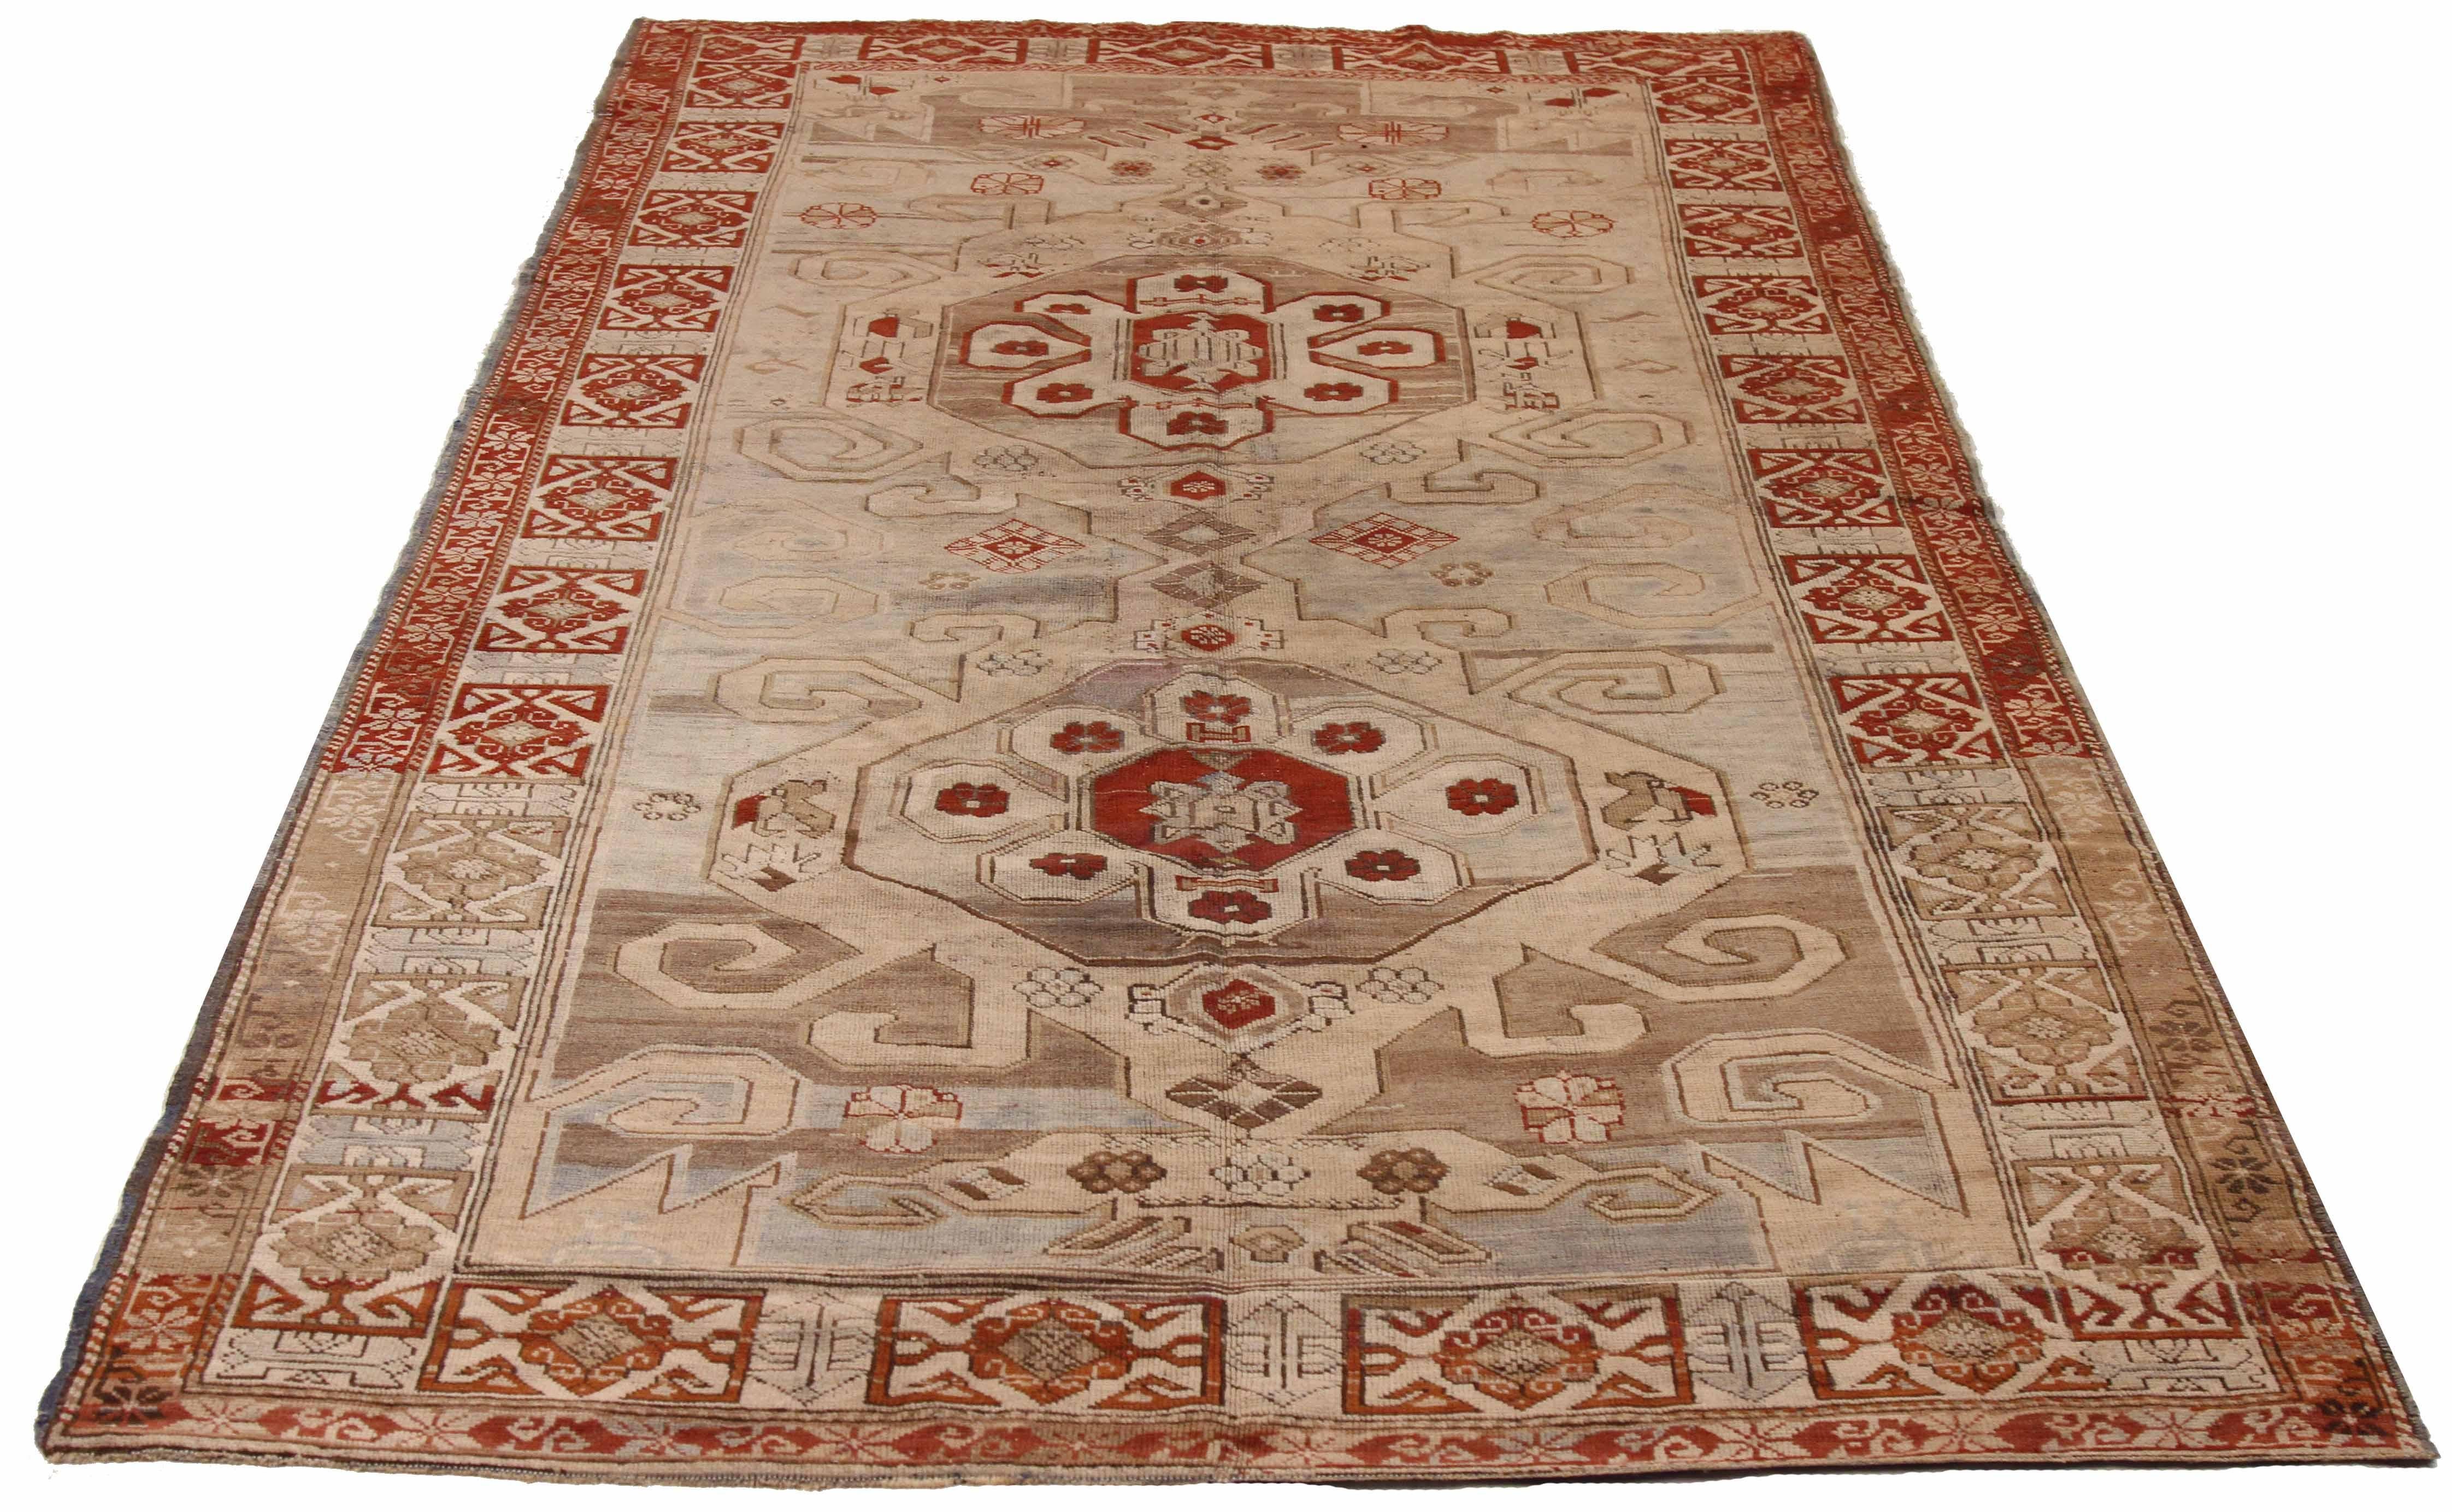 Antique Russia area rug handwoven from the finest sheep’s wool. It’s colored with all-natural vegetable dyes that are safe for humans and pets. It’s a traditional Ghafghaz design handwoven by expert artisans. It’s a lovely area rug that can be